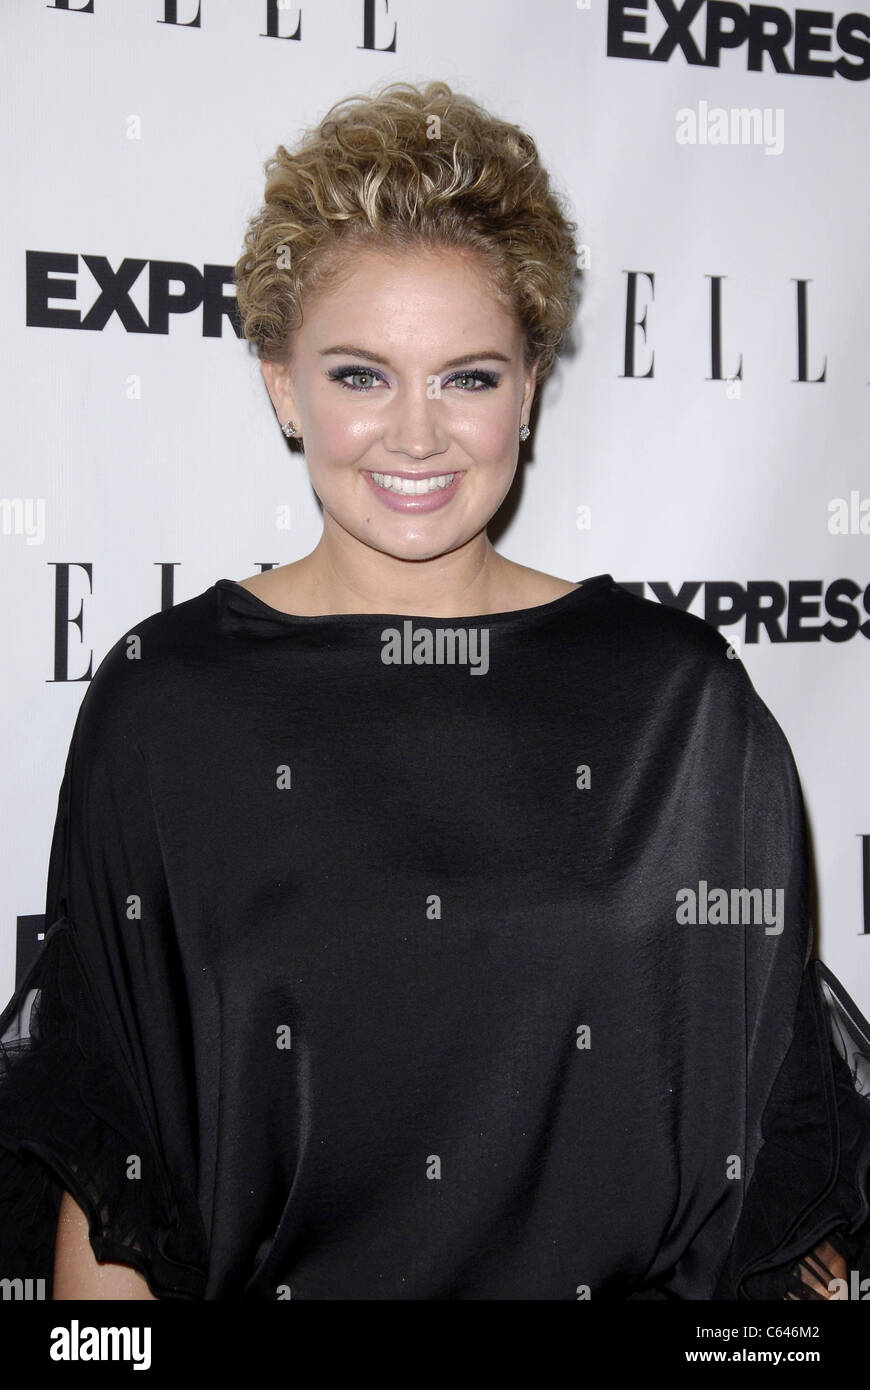 Tiffany Thornton at arrivals for ELLE and Express 25 at 25 Event, Palihouse in West Hollywood, Los Angeles, CA October 7, 2010. Stock Photo